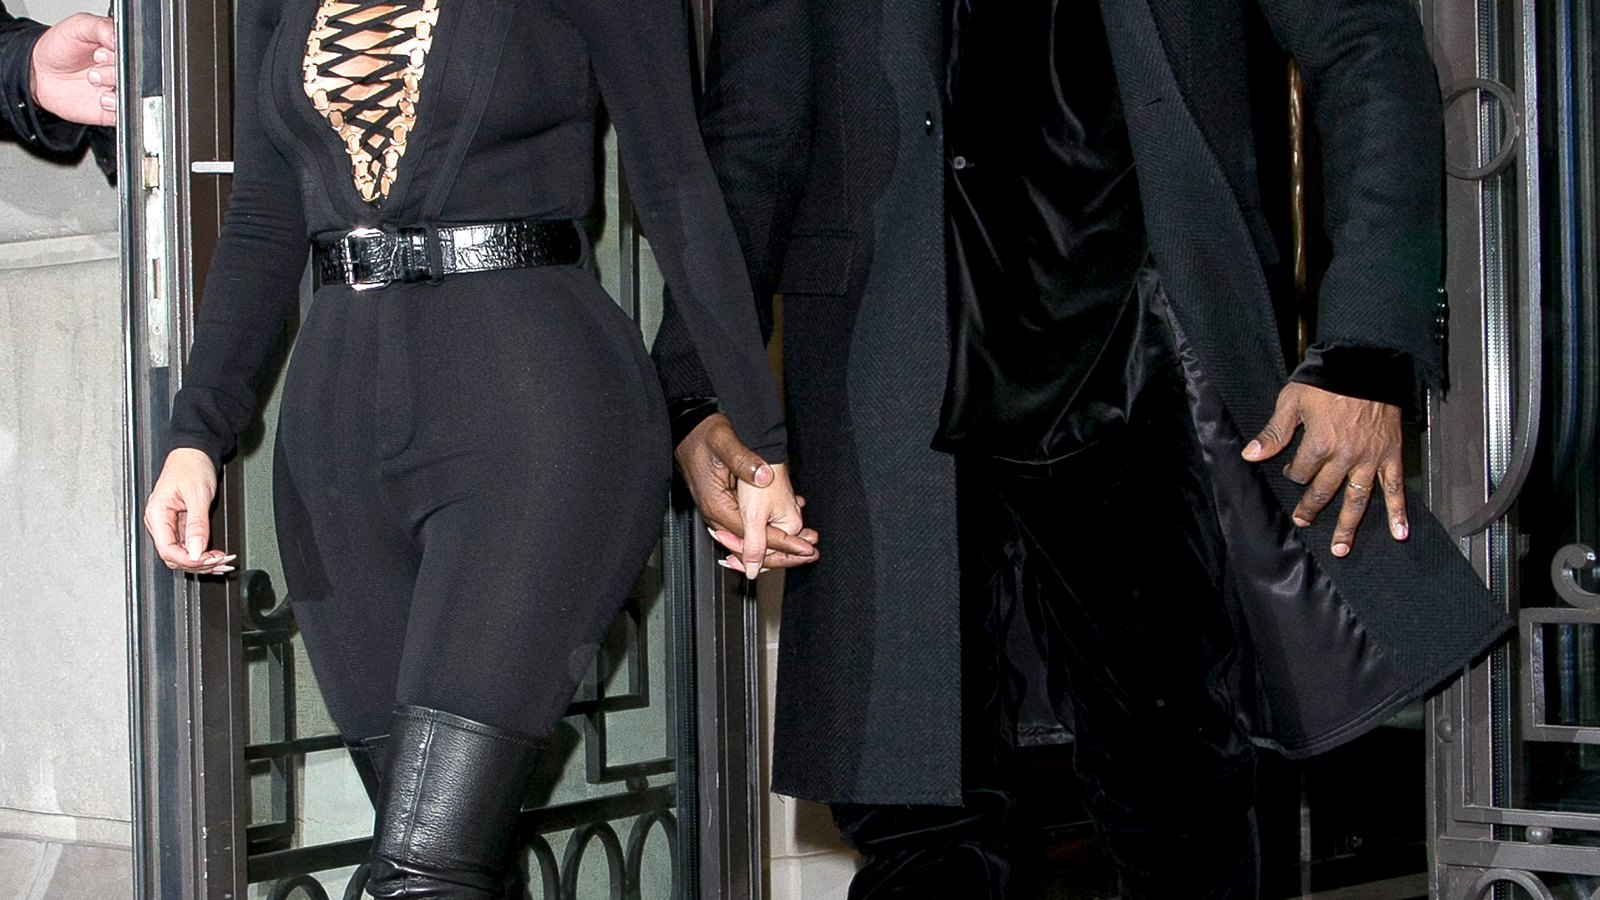 Kim Kardashian West and husband Kanye West are seen on March 8, 2015.